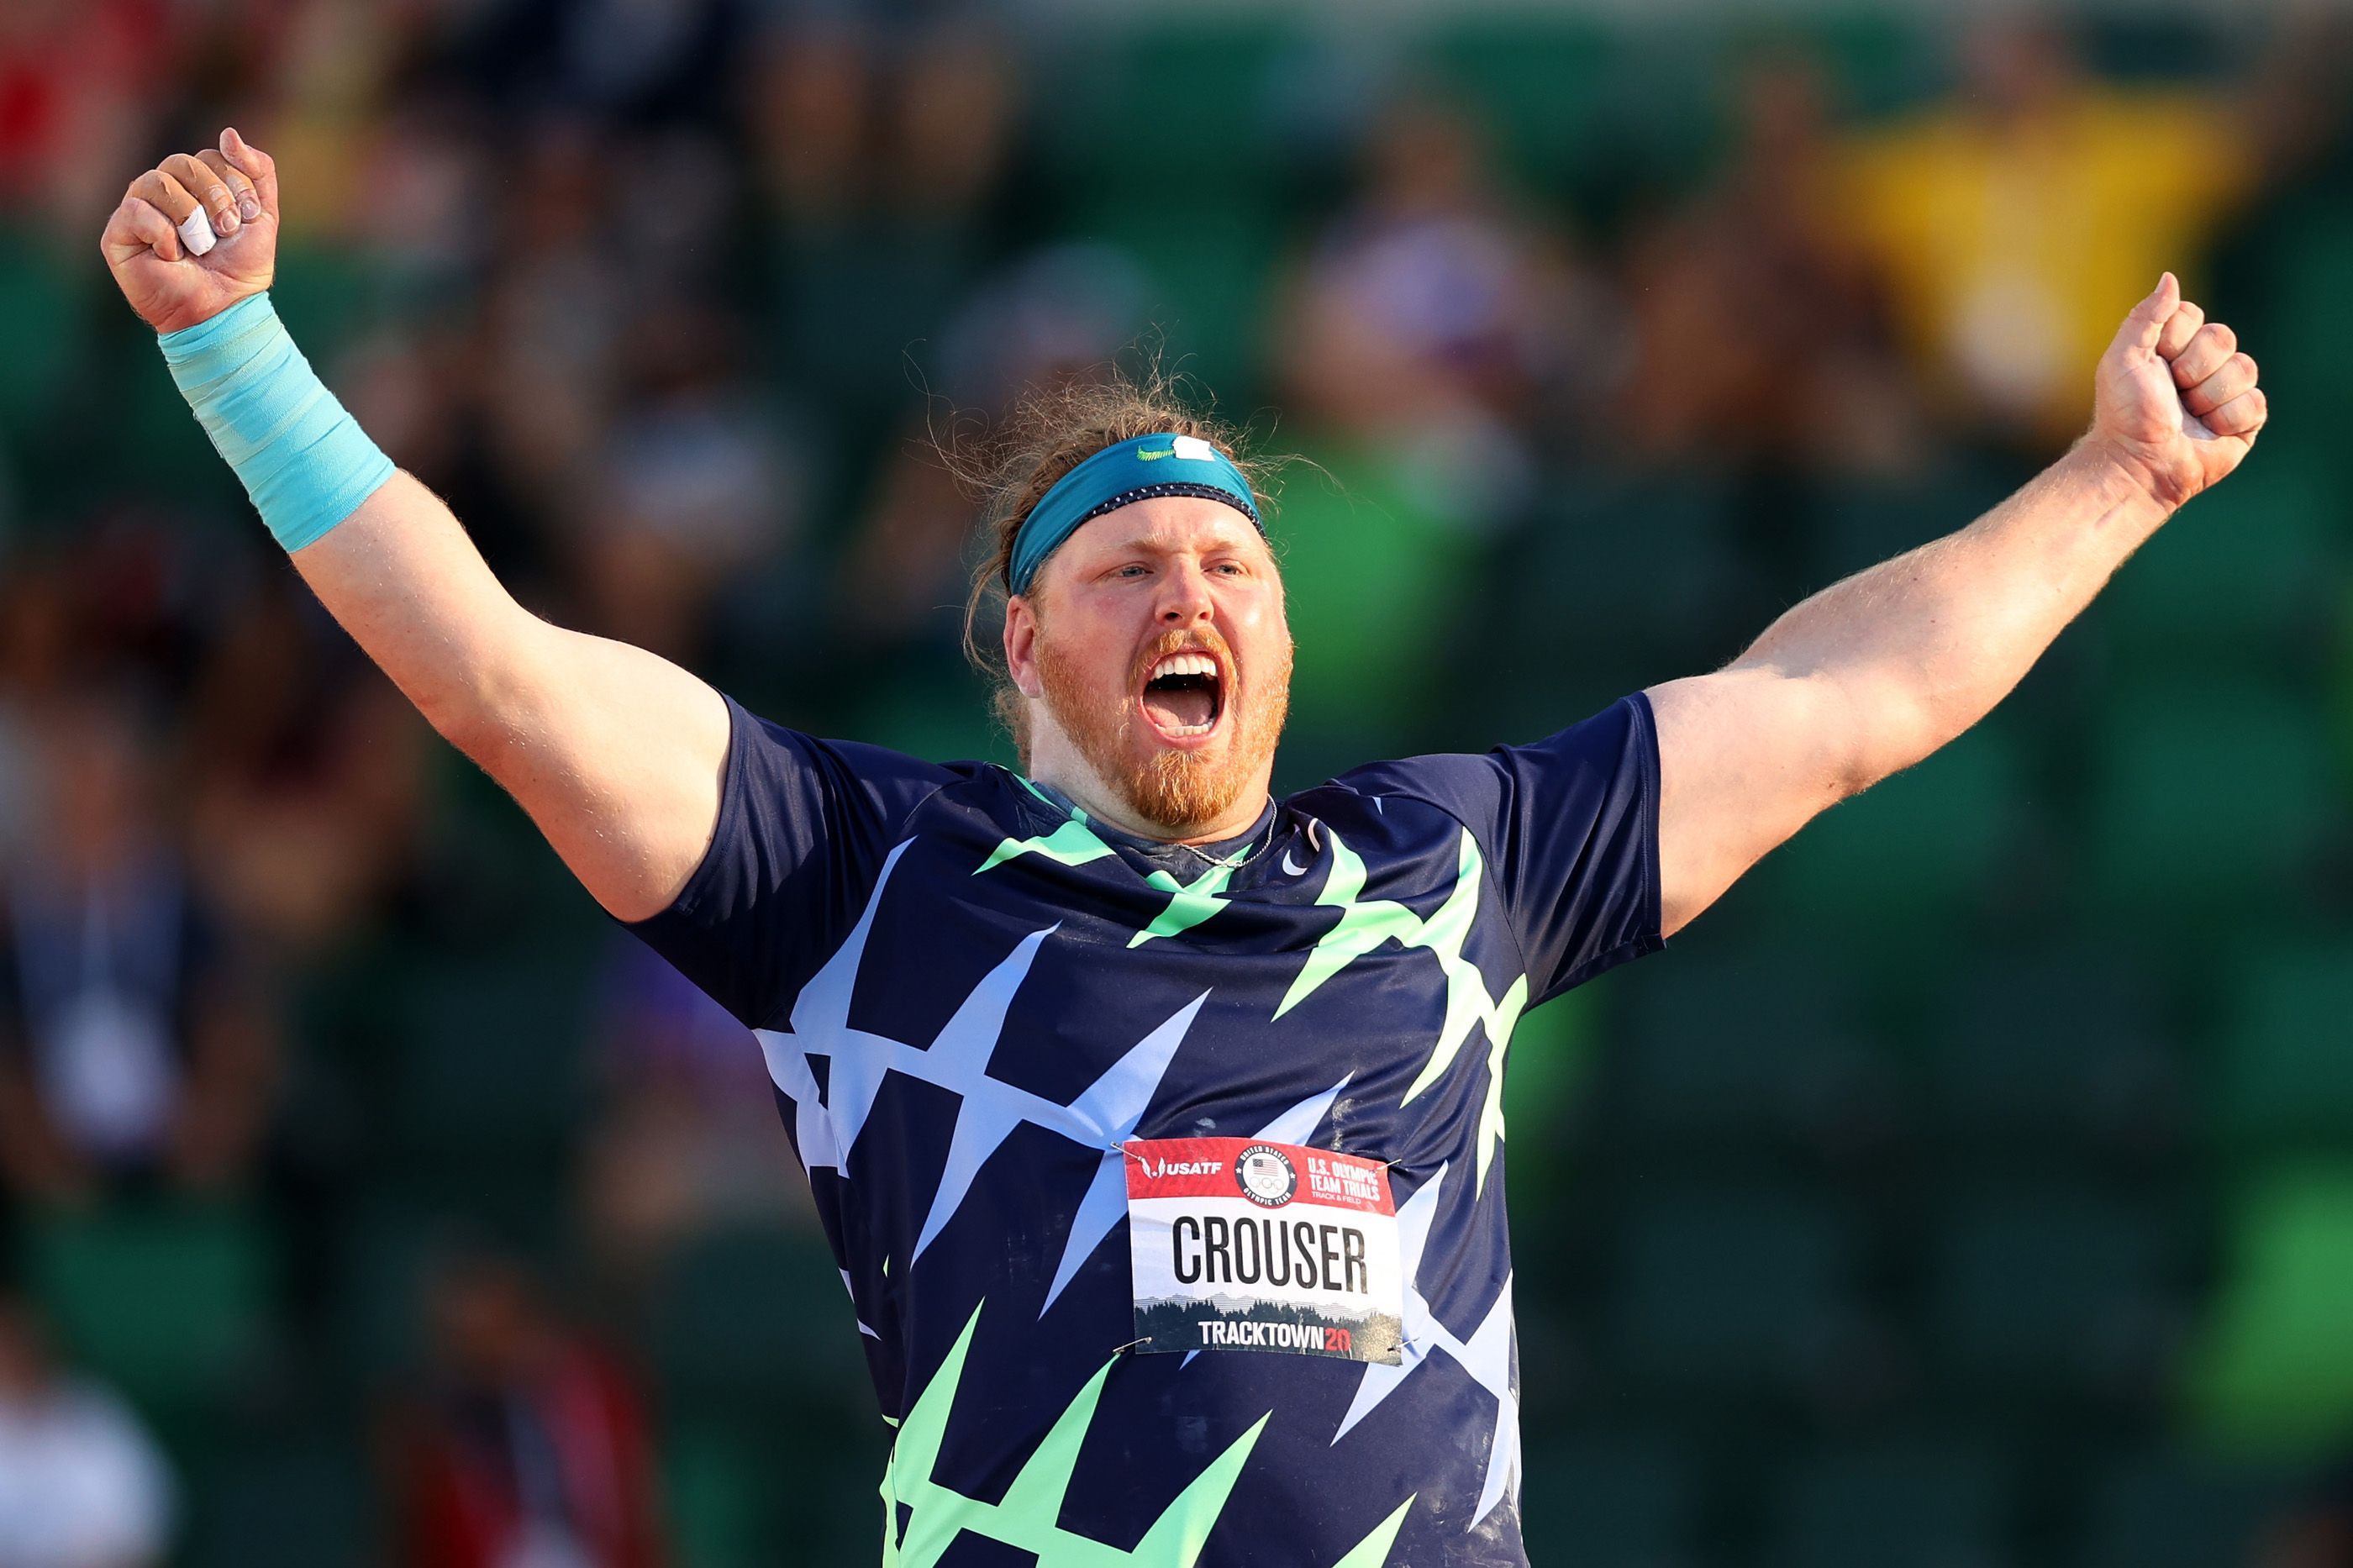 Ryan Crouser after breaking the world shot put record in Eugene